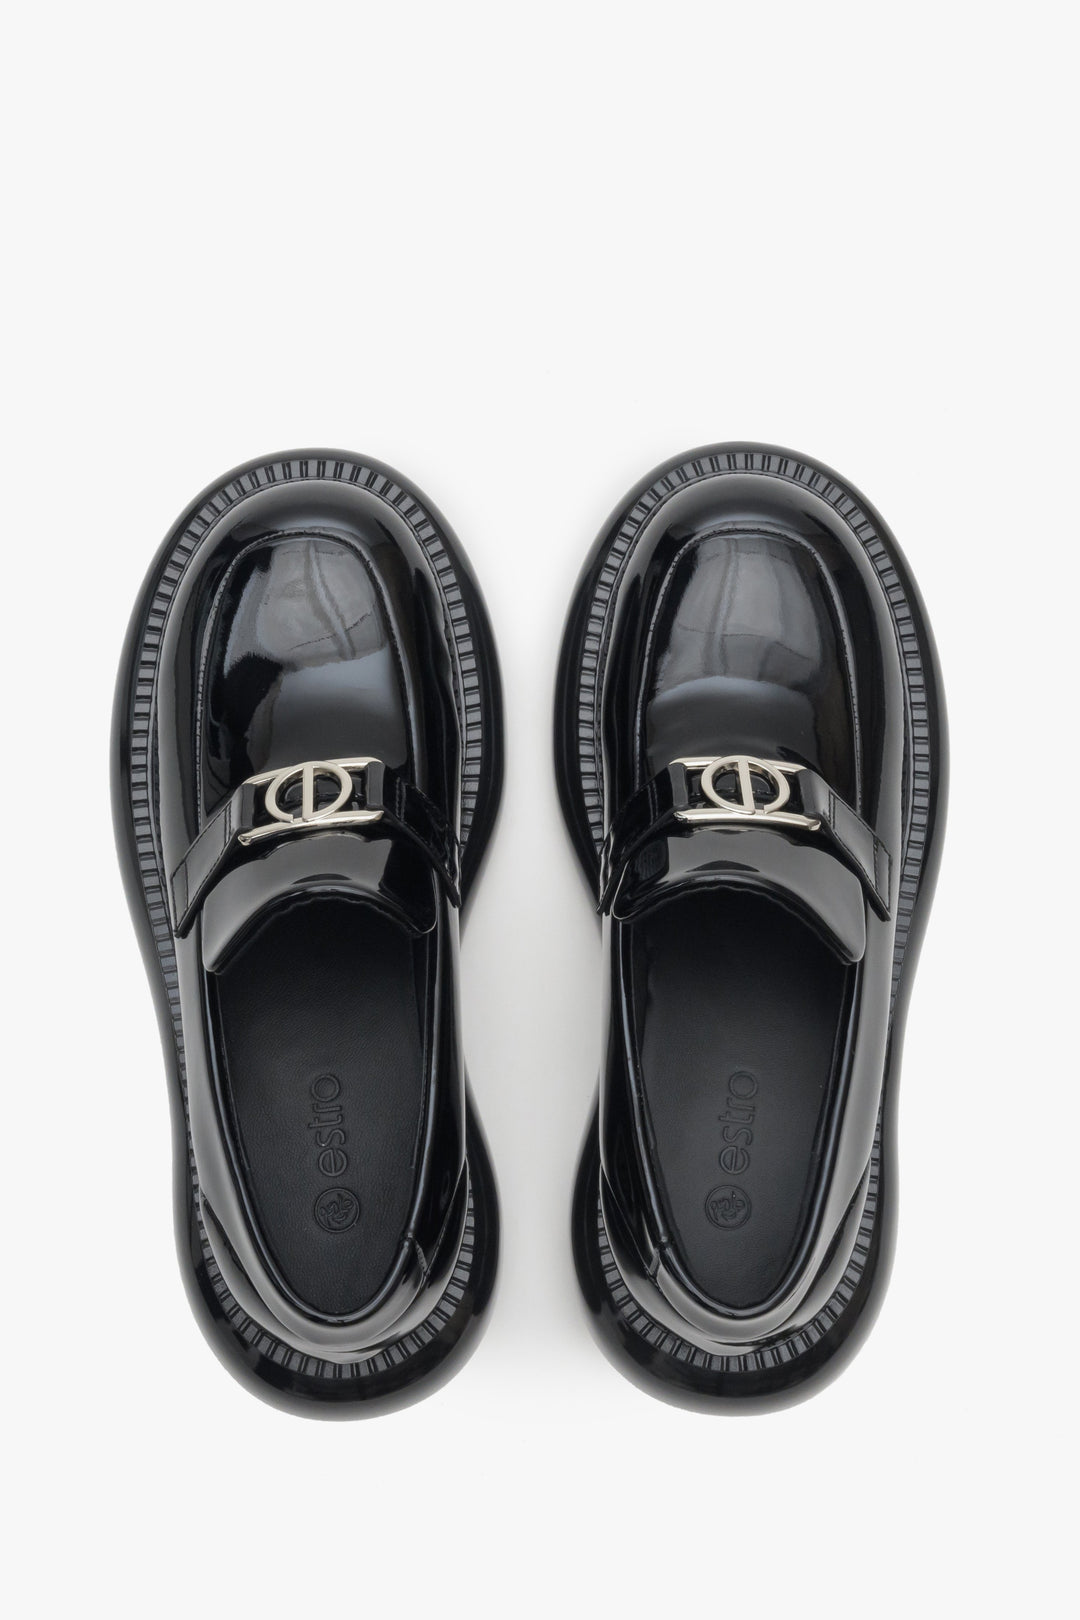 Black patent leather loafers Estro - presentation from above.